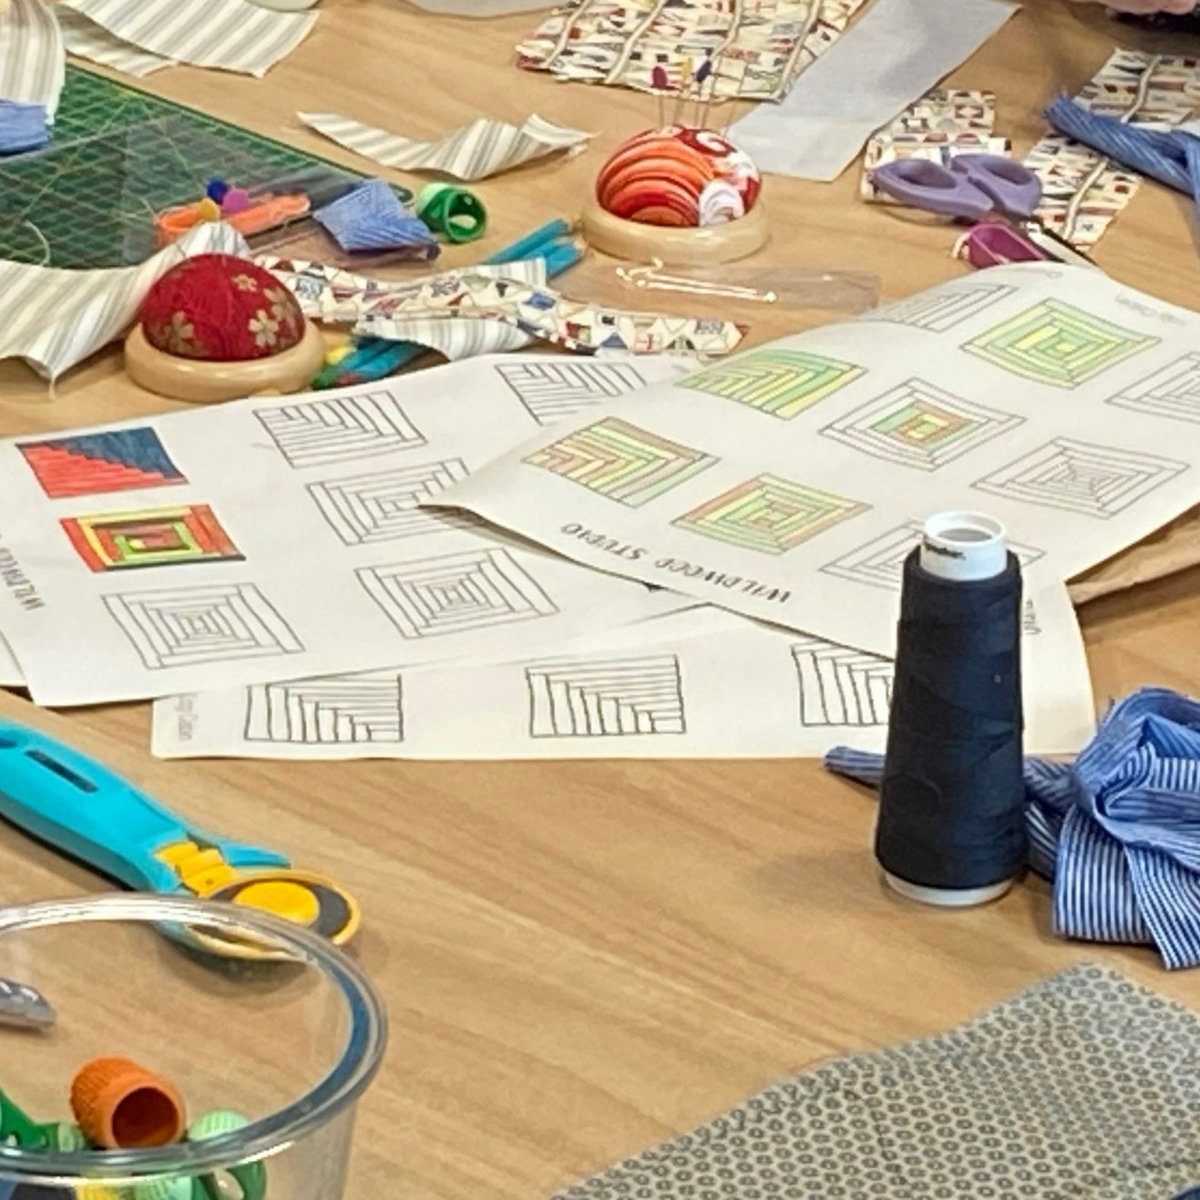 Our Social Fabric Quilt project led by Allegra Galvin of and Nathanial Mason, started last week at @paigntonlibrary. The project will culminate in the creation of a single quilt, weaving together the rich story of #Torbay's community #ACEsupported @TorquayLib #Churston #Brixham